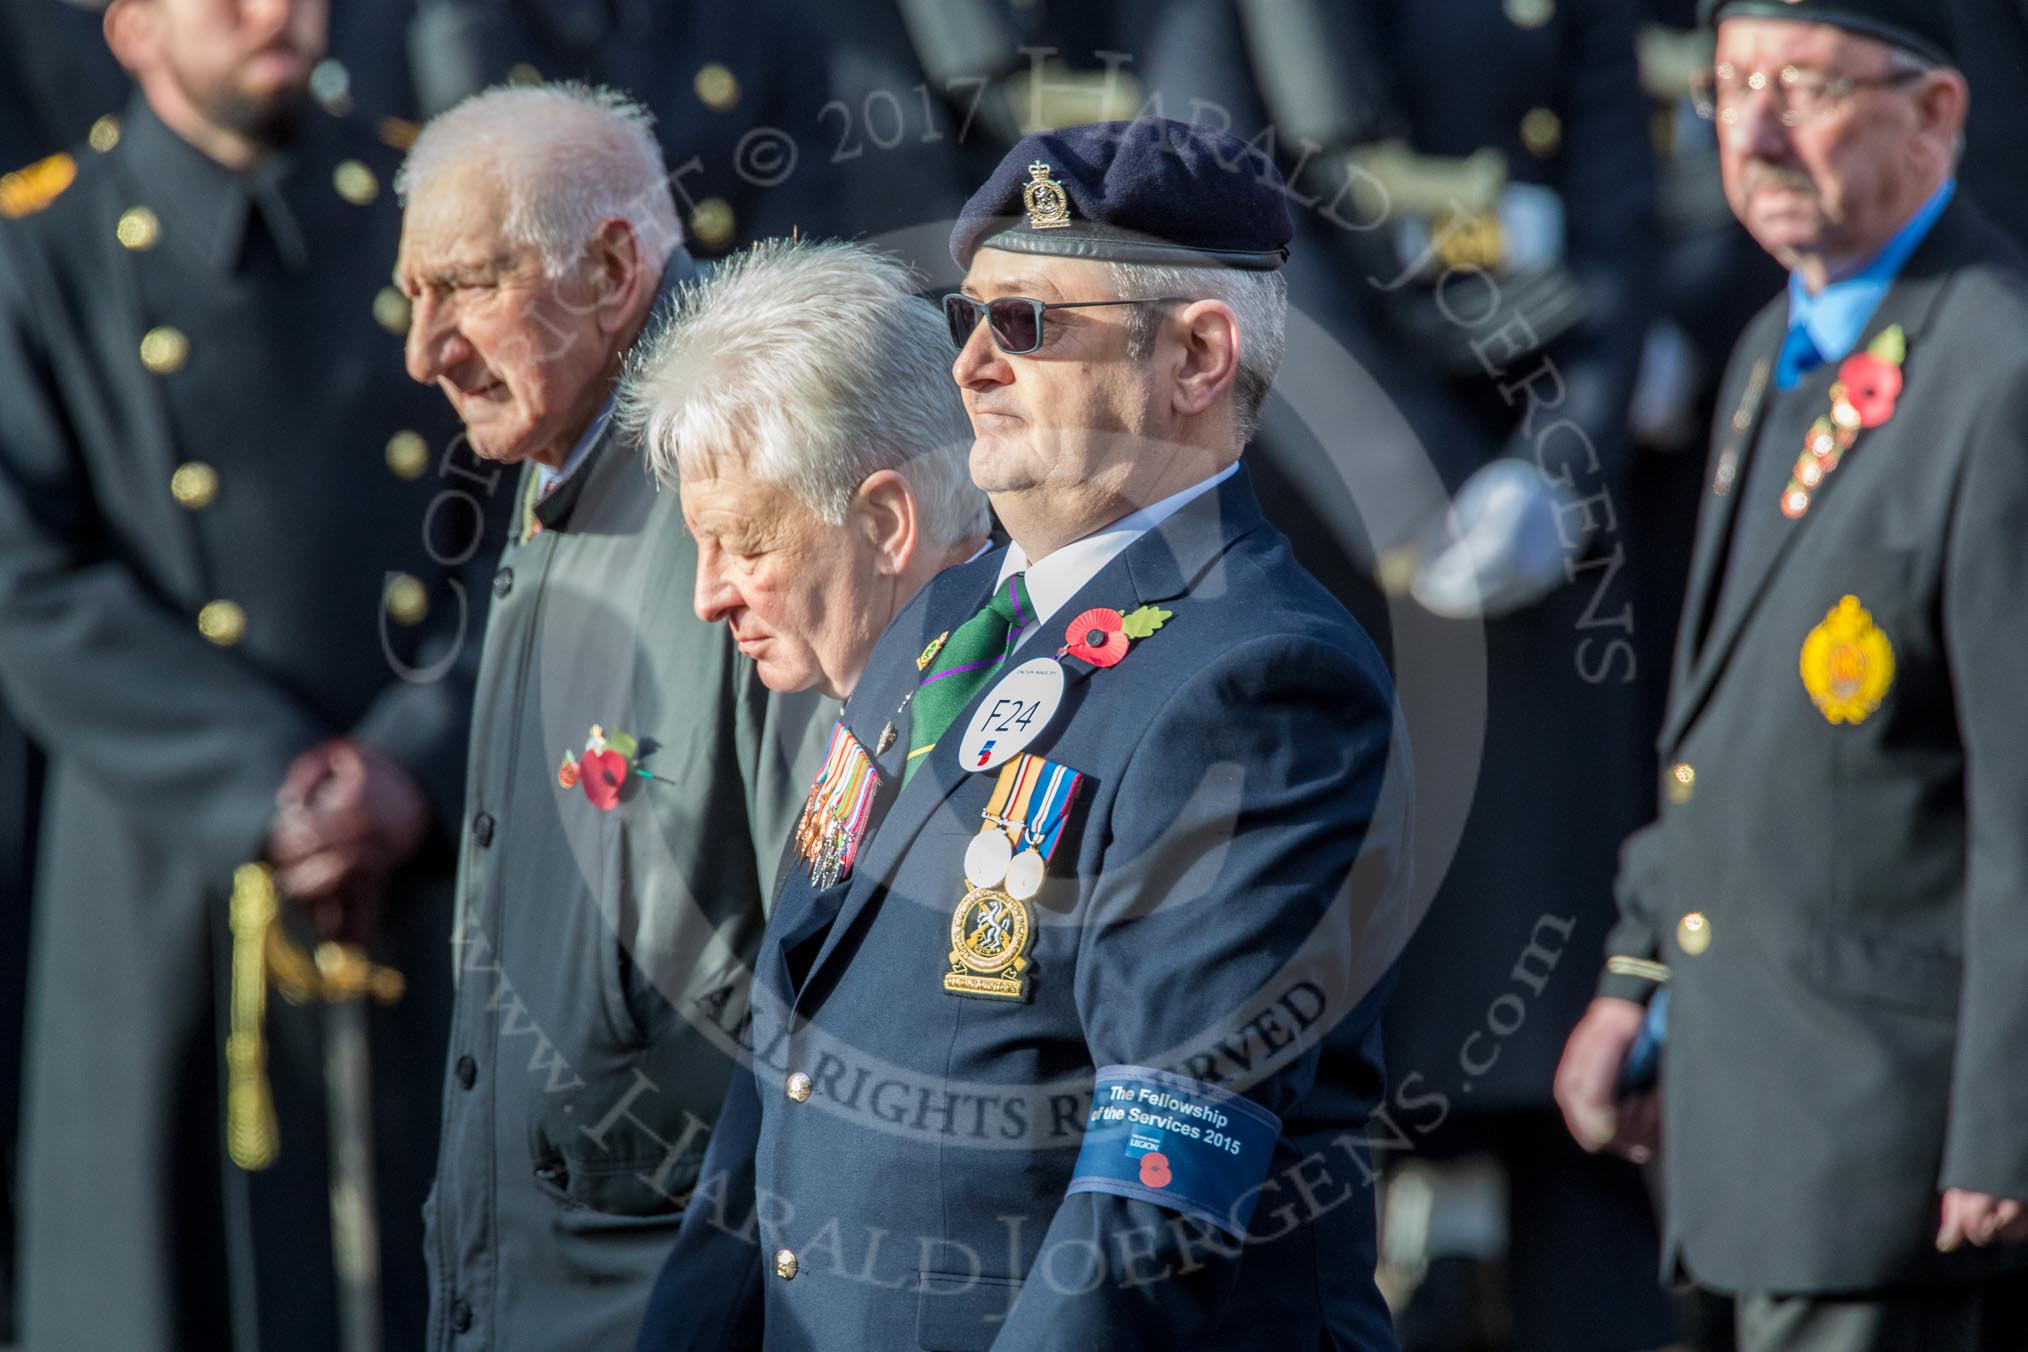 The Fellowship of the Services 2015 (Group F24, 23 members) during the Royal British Legion March Past on Remembrance Sunday at the Cenotaph, Whitehall, Westminster, London, 11 November 2018, 11:53.